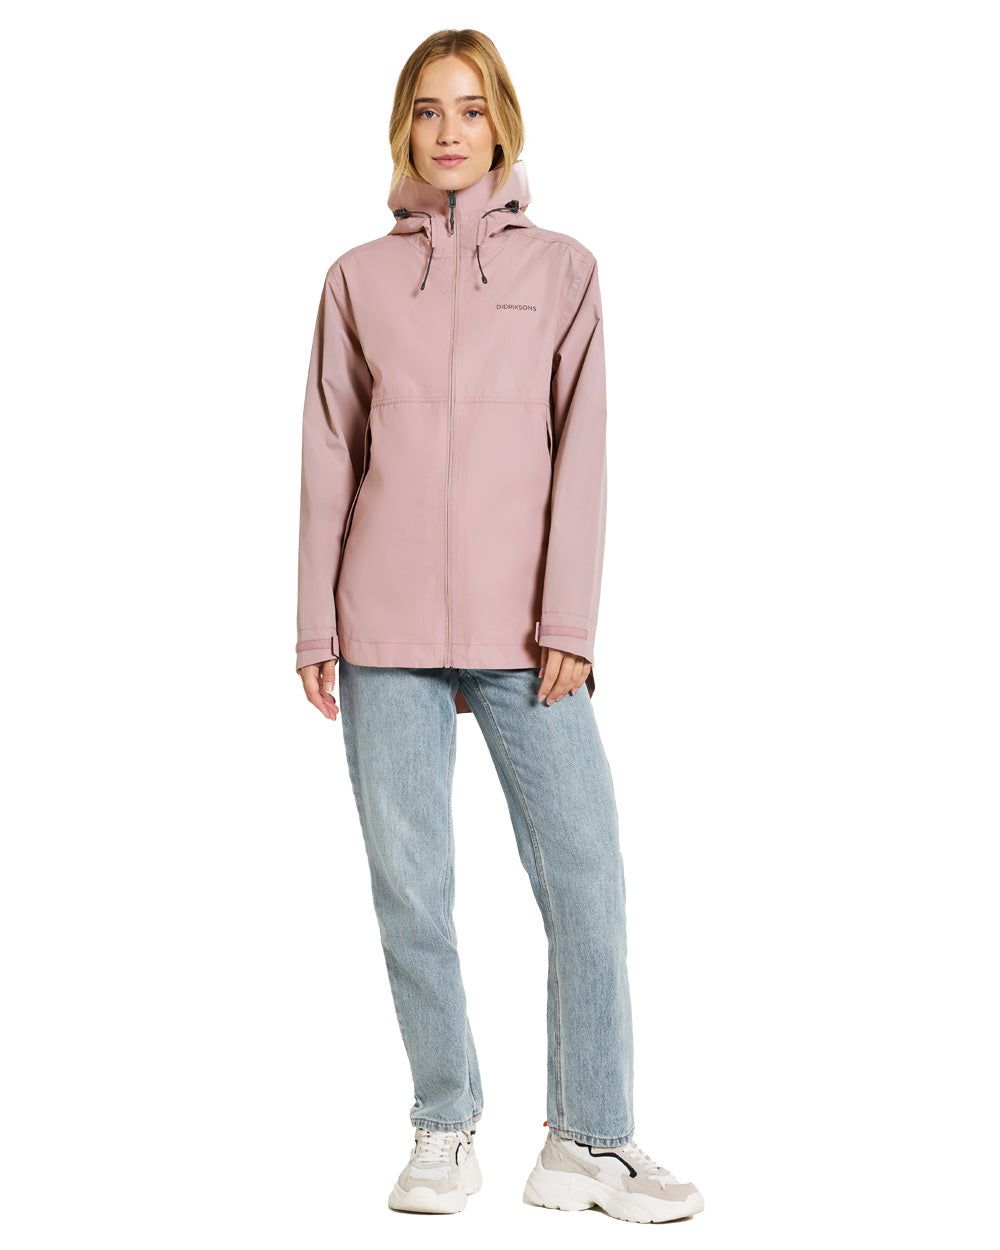 Oyster Lilac coloured Didriksons Tilde Womens Jacket on White background 